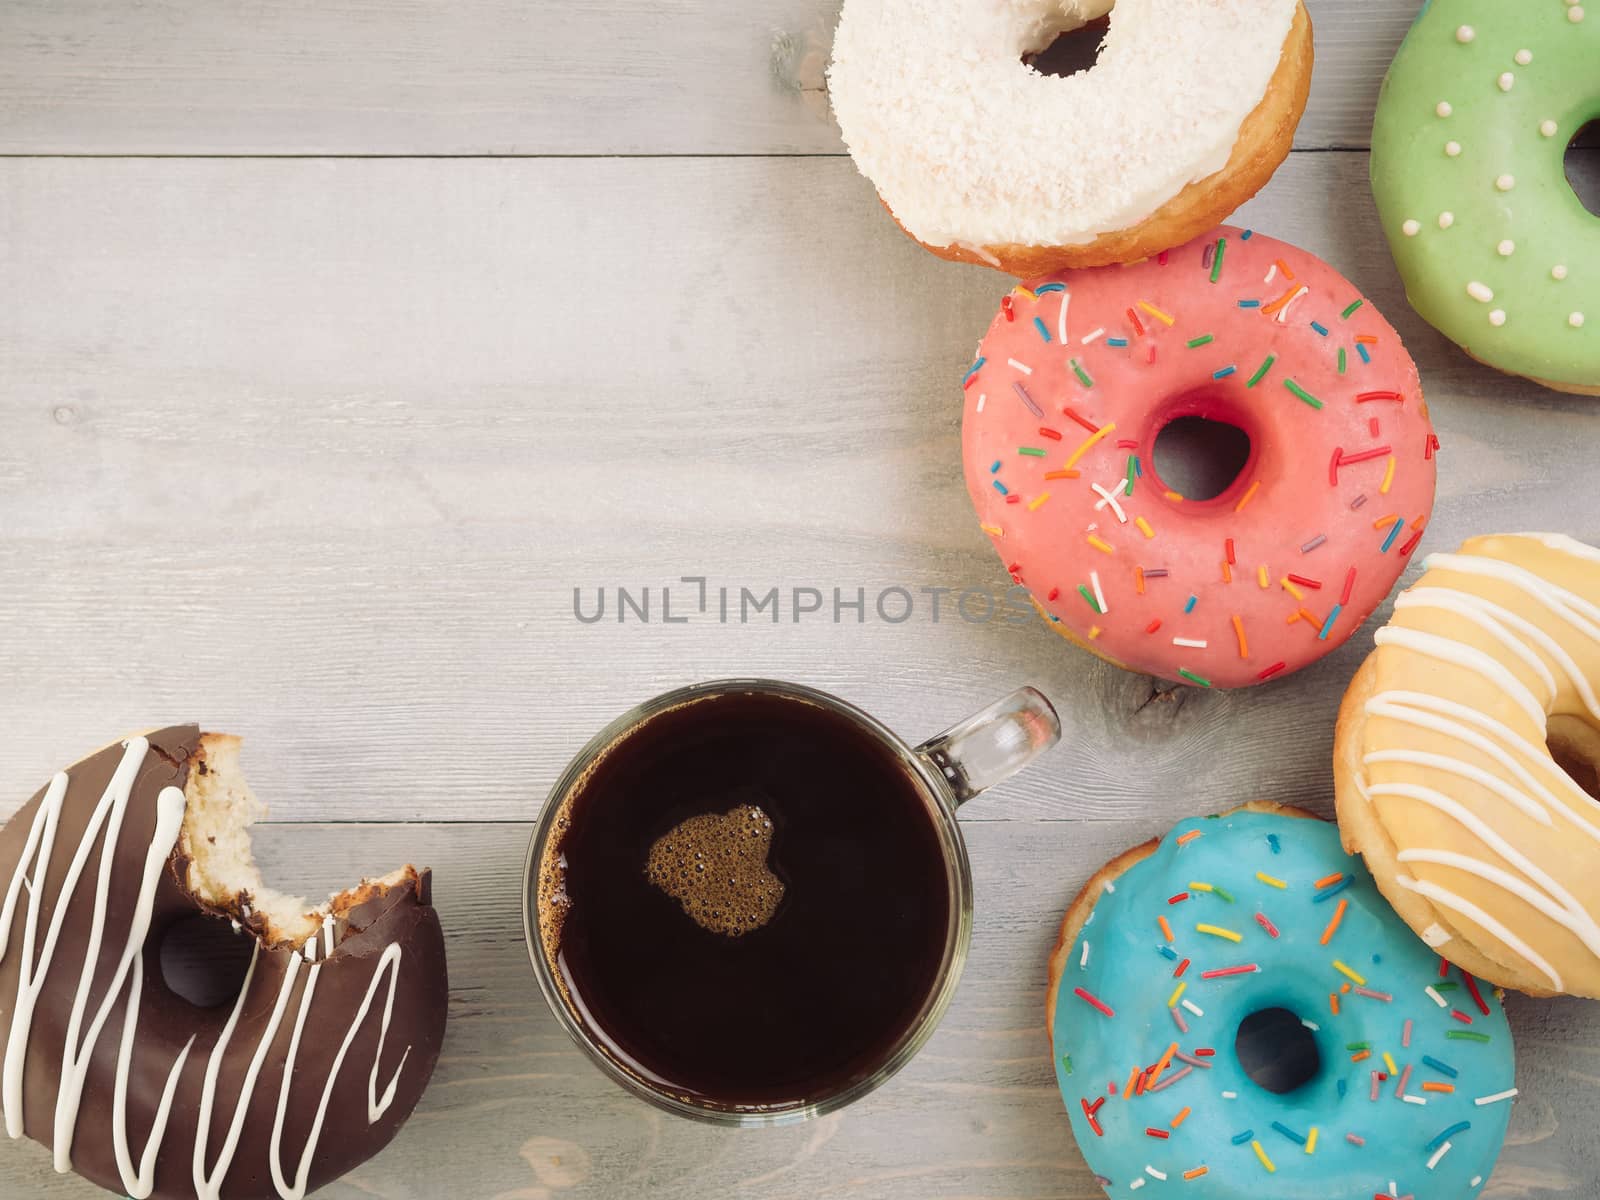 Top view of assorted donuts and coffee on gray wooden background with copy space. Colorful donuts and coffee with copyspace. Various glazed doughnuts with sprinkles on grey wooden table. Toned image